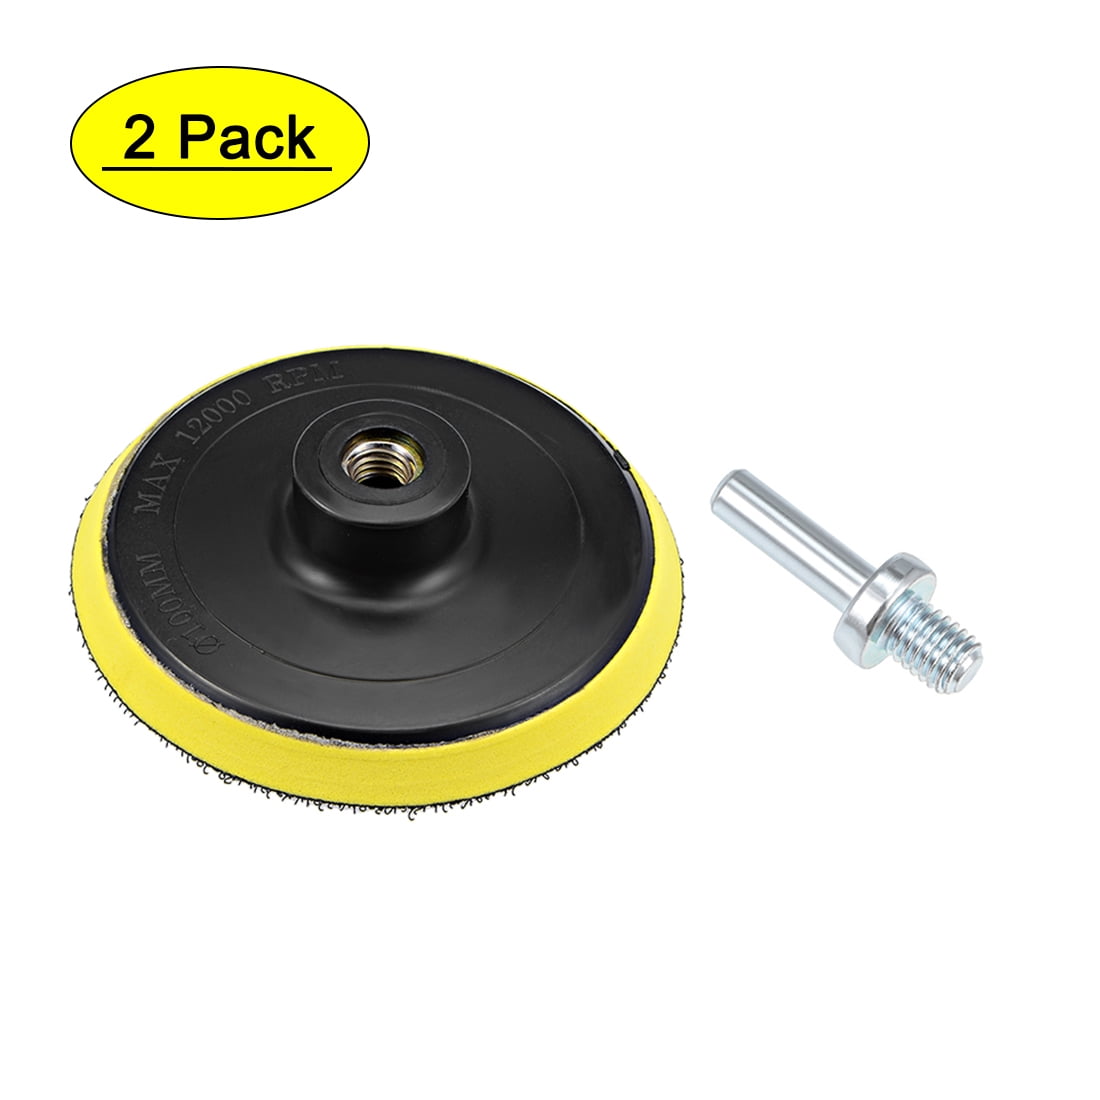 60 x Mixed Grit Hook & Loop 50mm Sanding Discs with Backing Pad & Drill Adaptor 